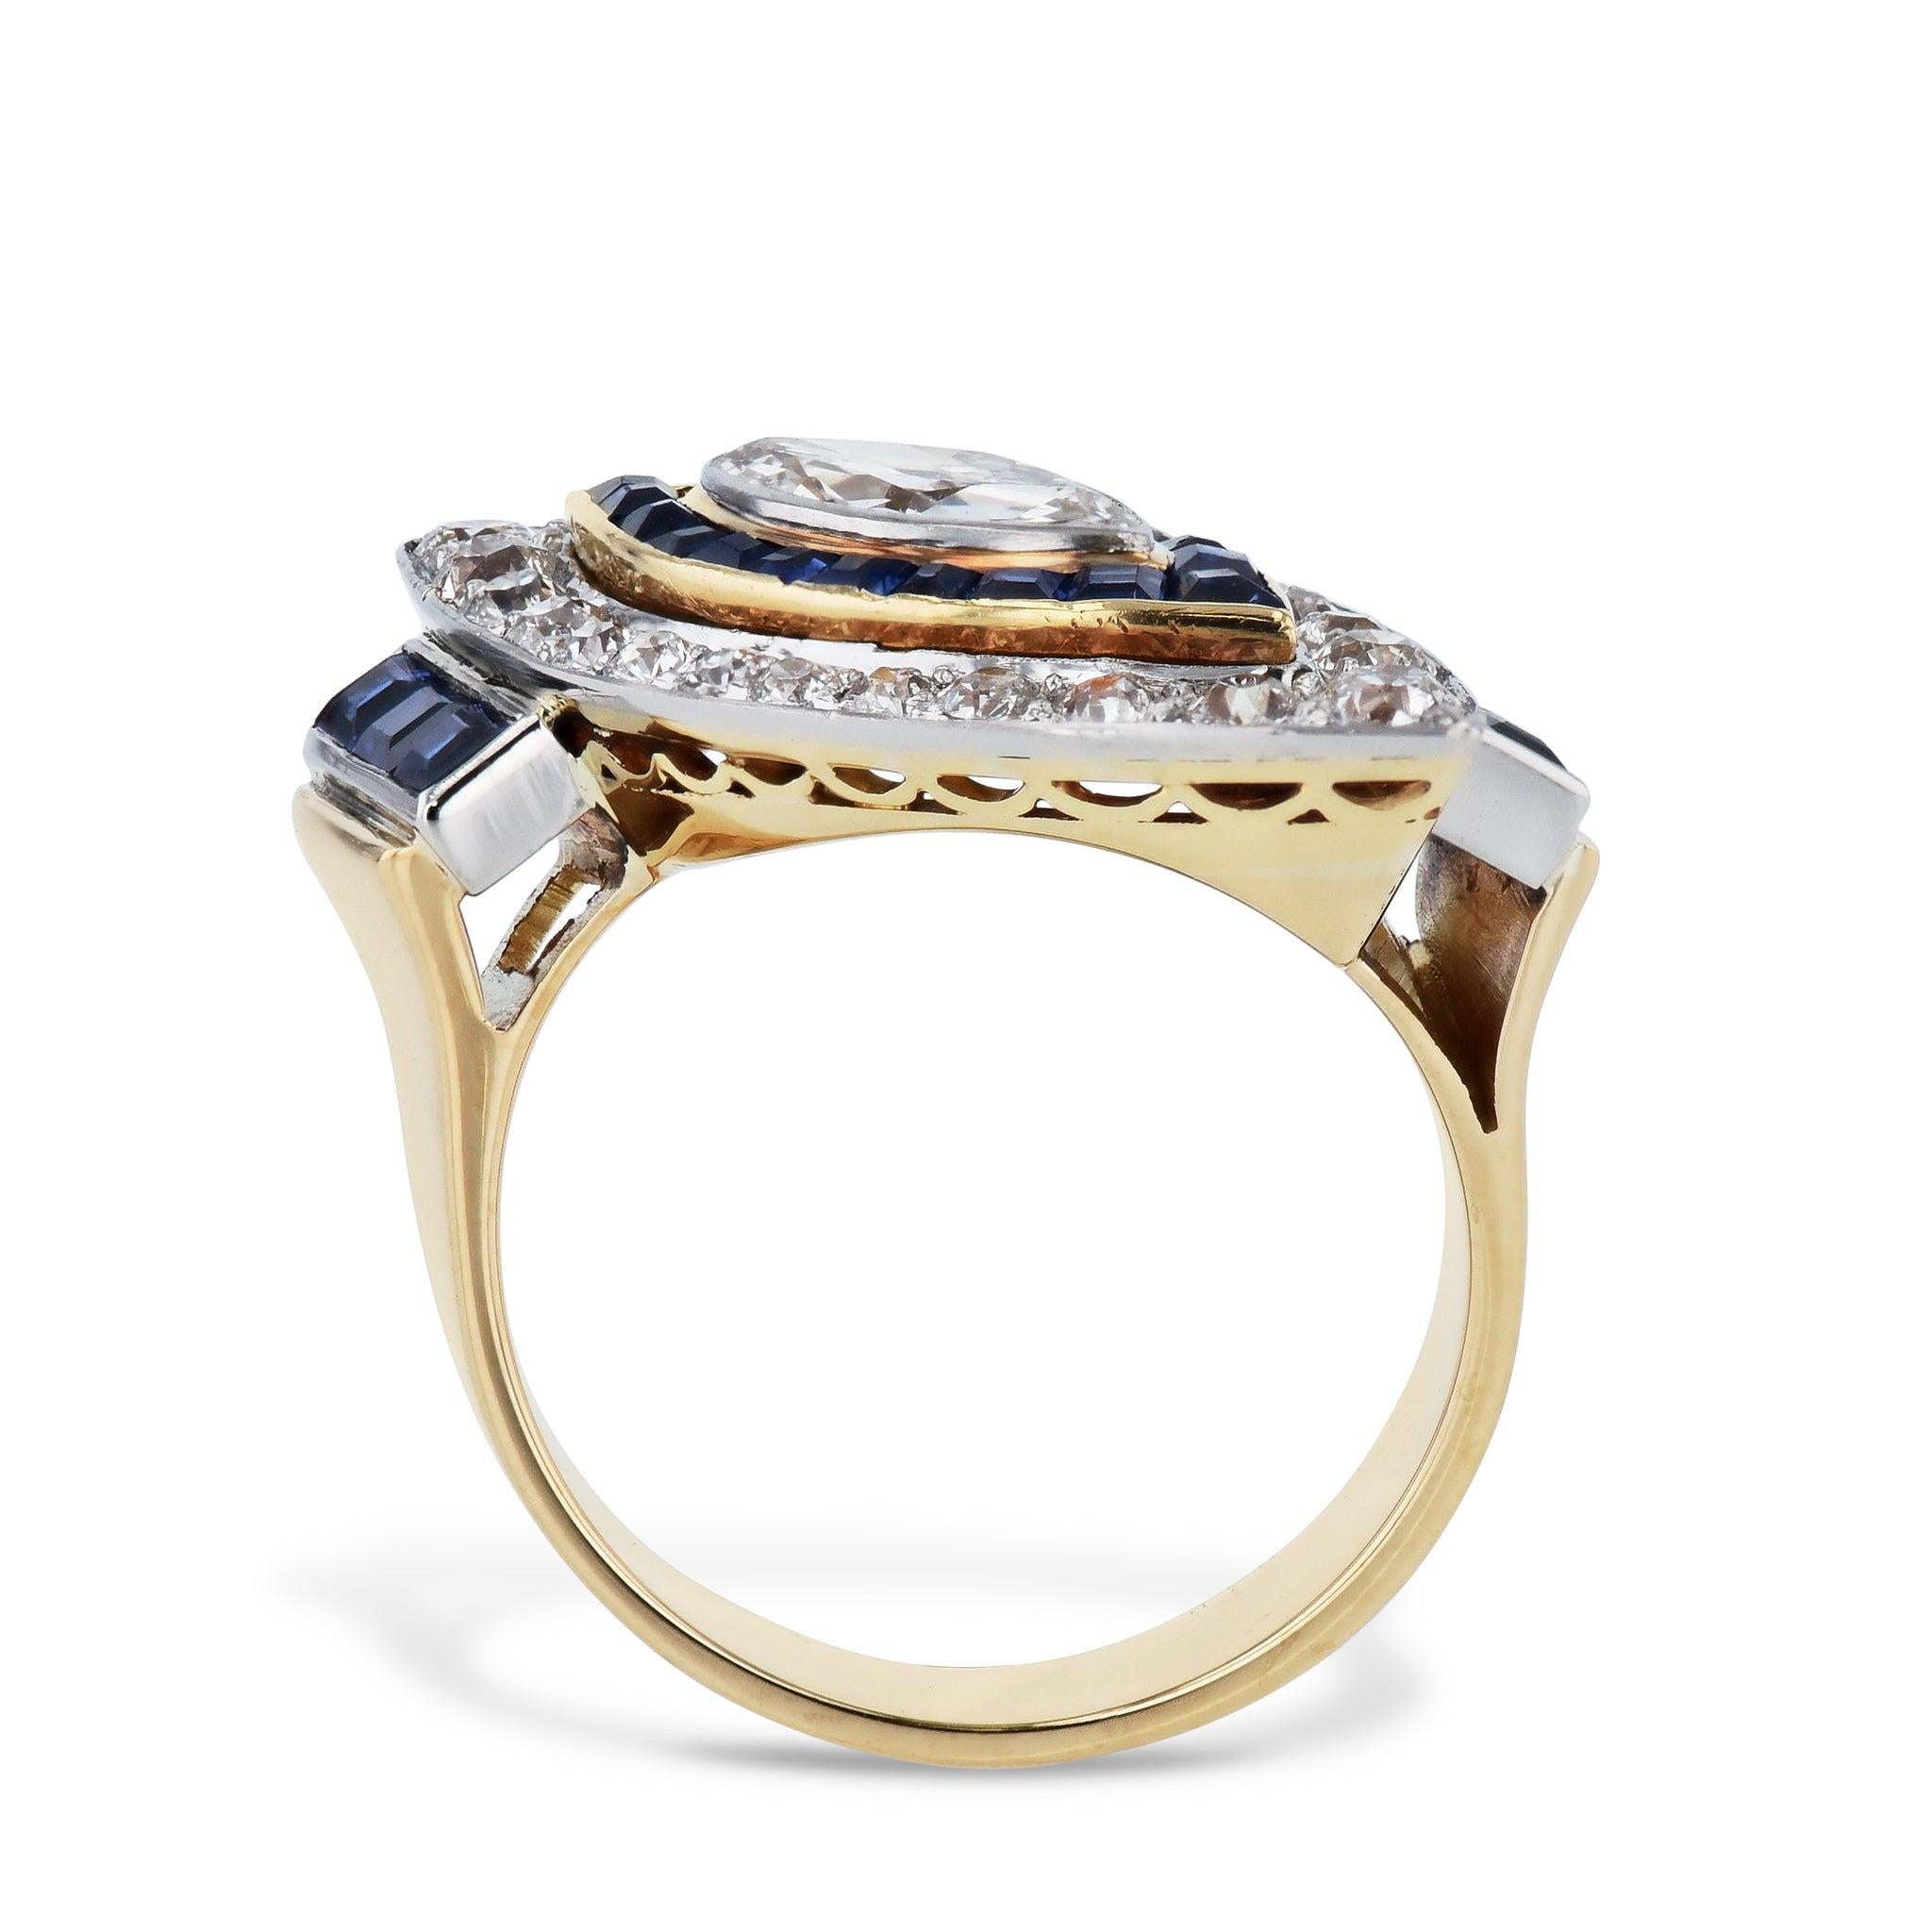 This Art Deco Marquise Diamond Sapphire Estate Ring sparkles with grandeur! Crafted from Platinum and 18kt yellow Gold, one Marquise cut diamond surrounded by 24 Old European cut Diamonds (approx. 0.70ct TW), 20 Calibre cut sapphires (approx. 0.40ct